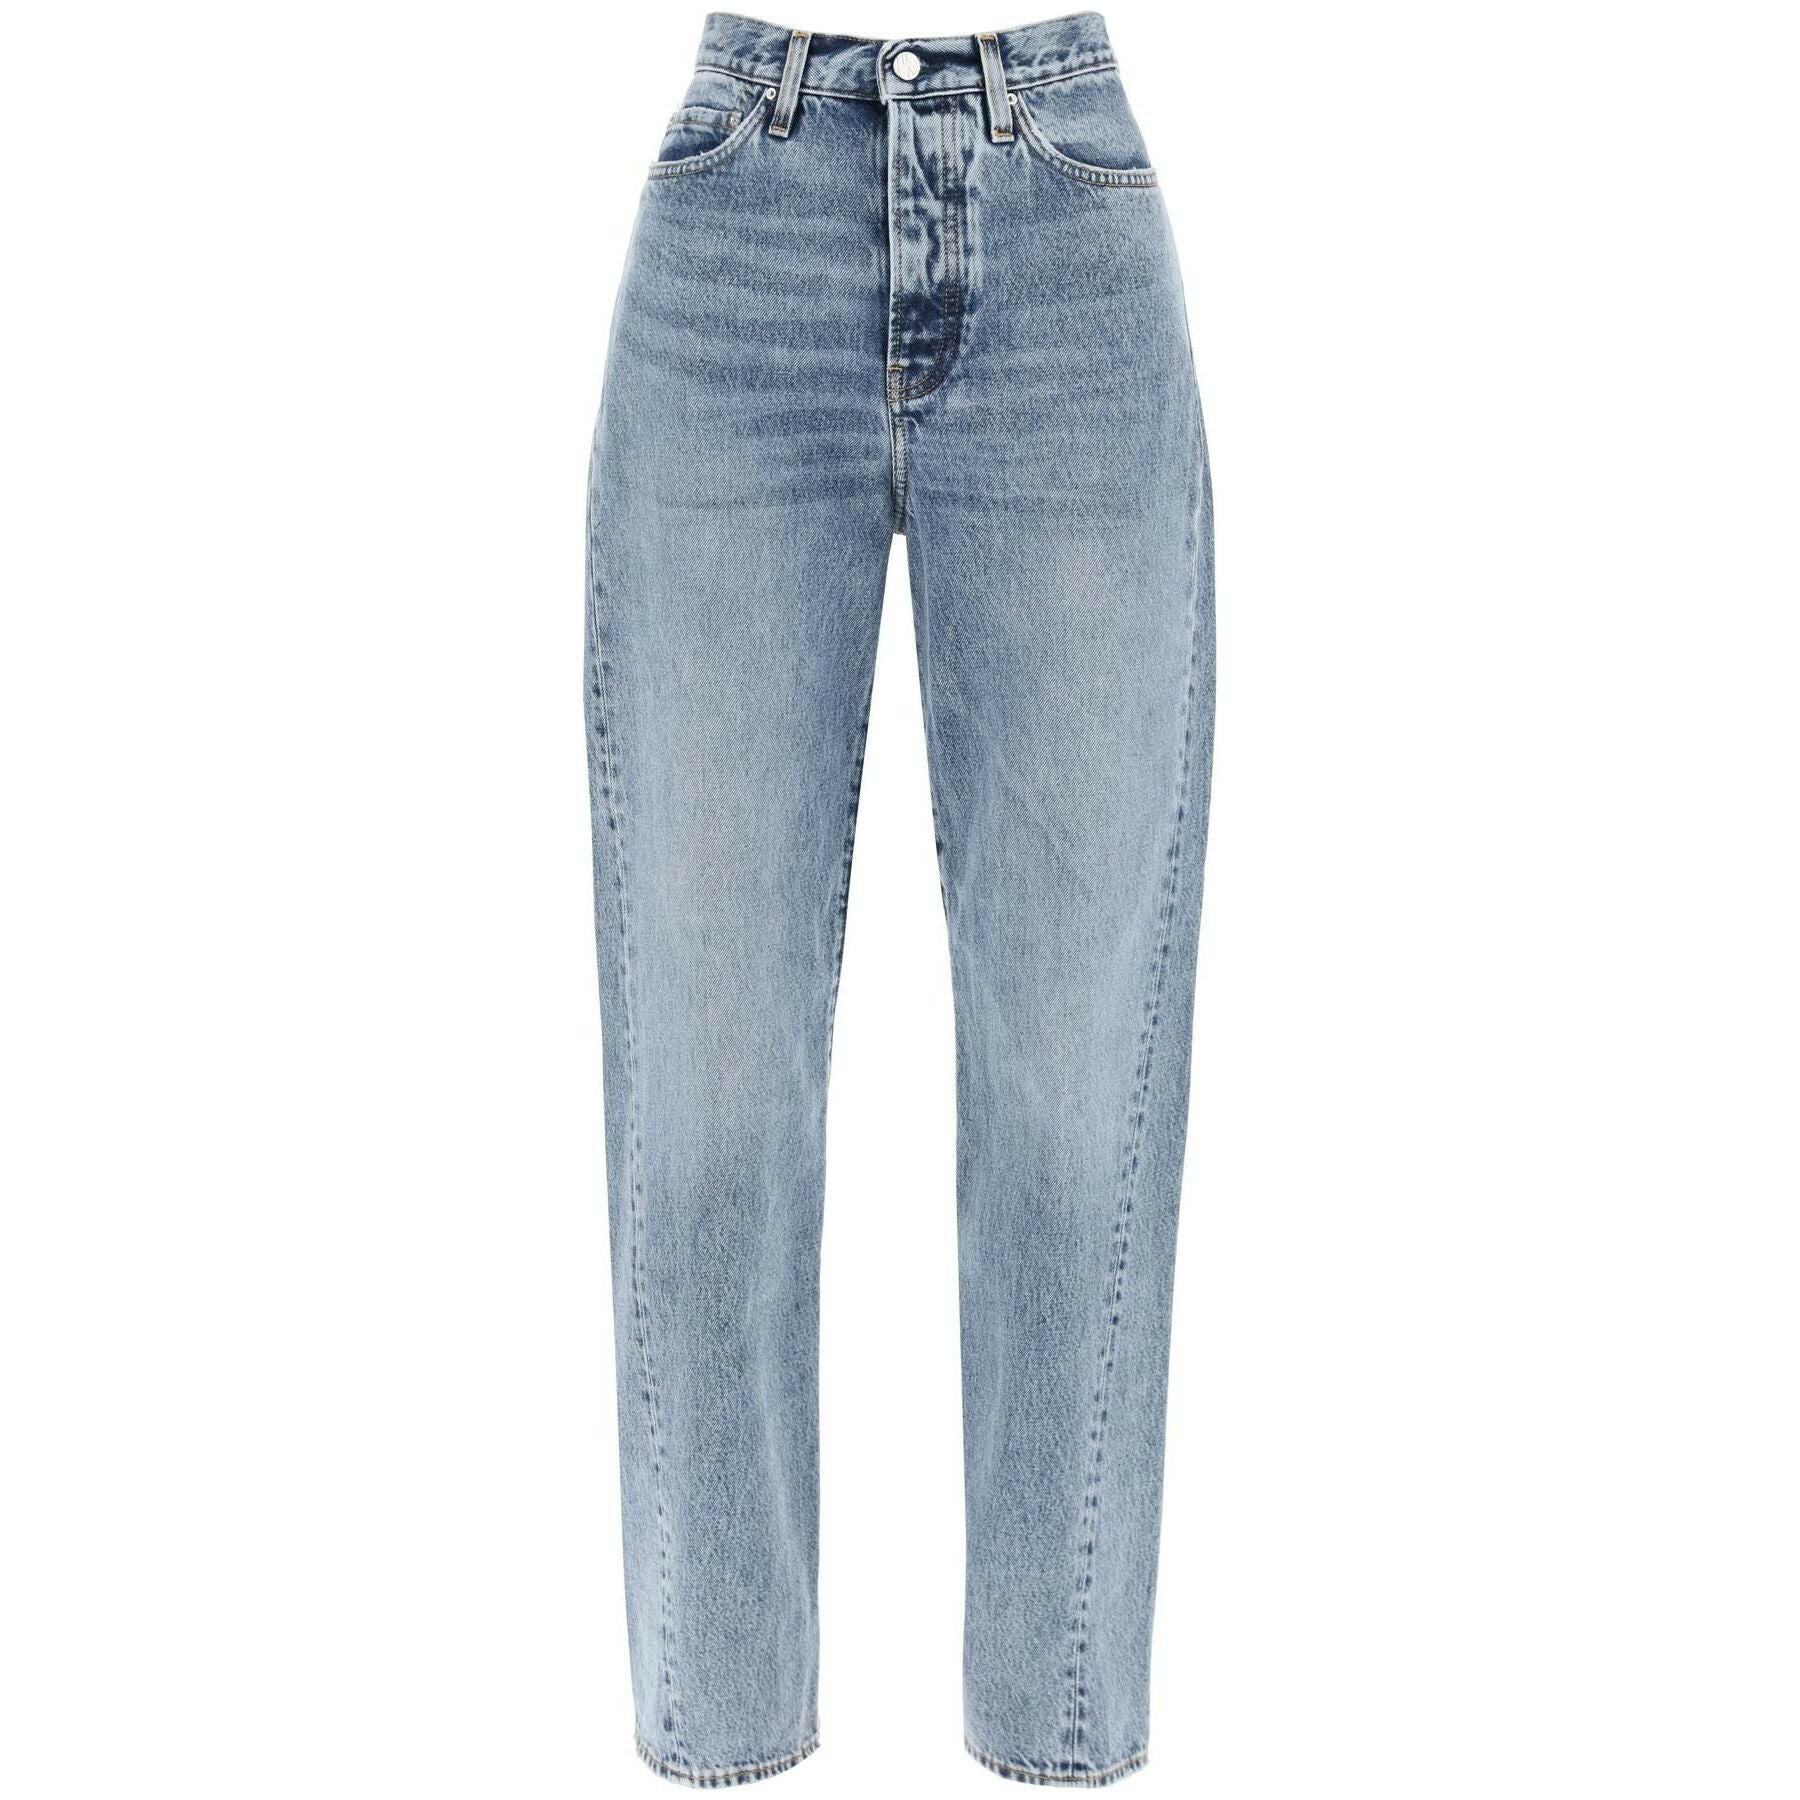 Twisted Seam Organic Cotton Full Length Jeans